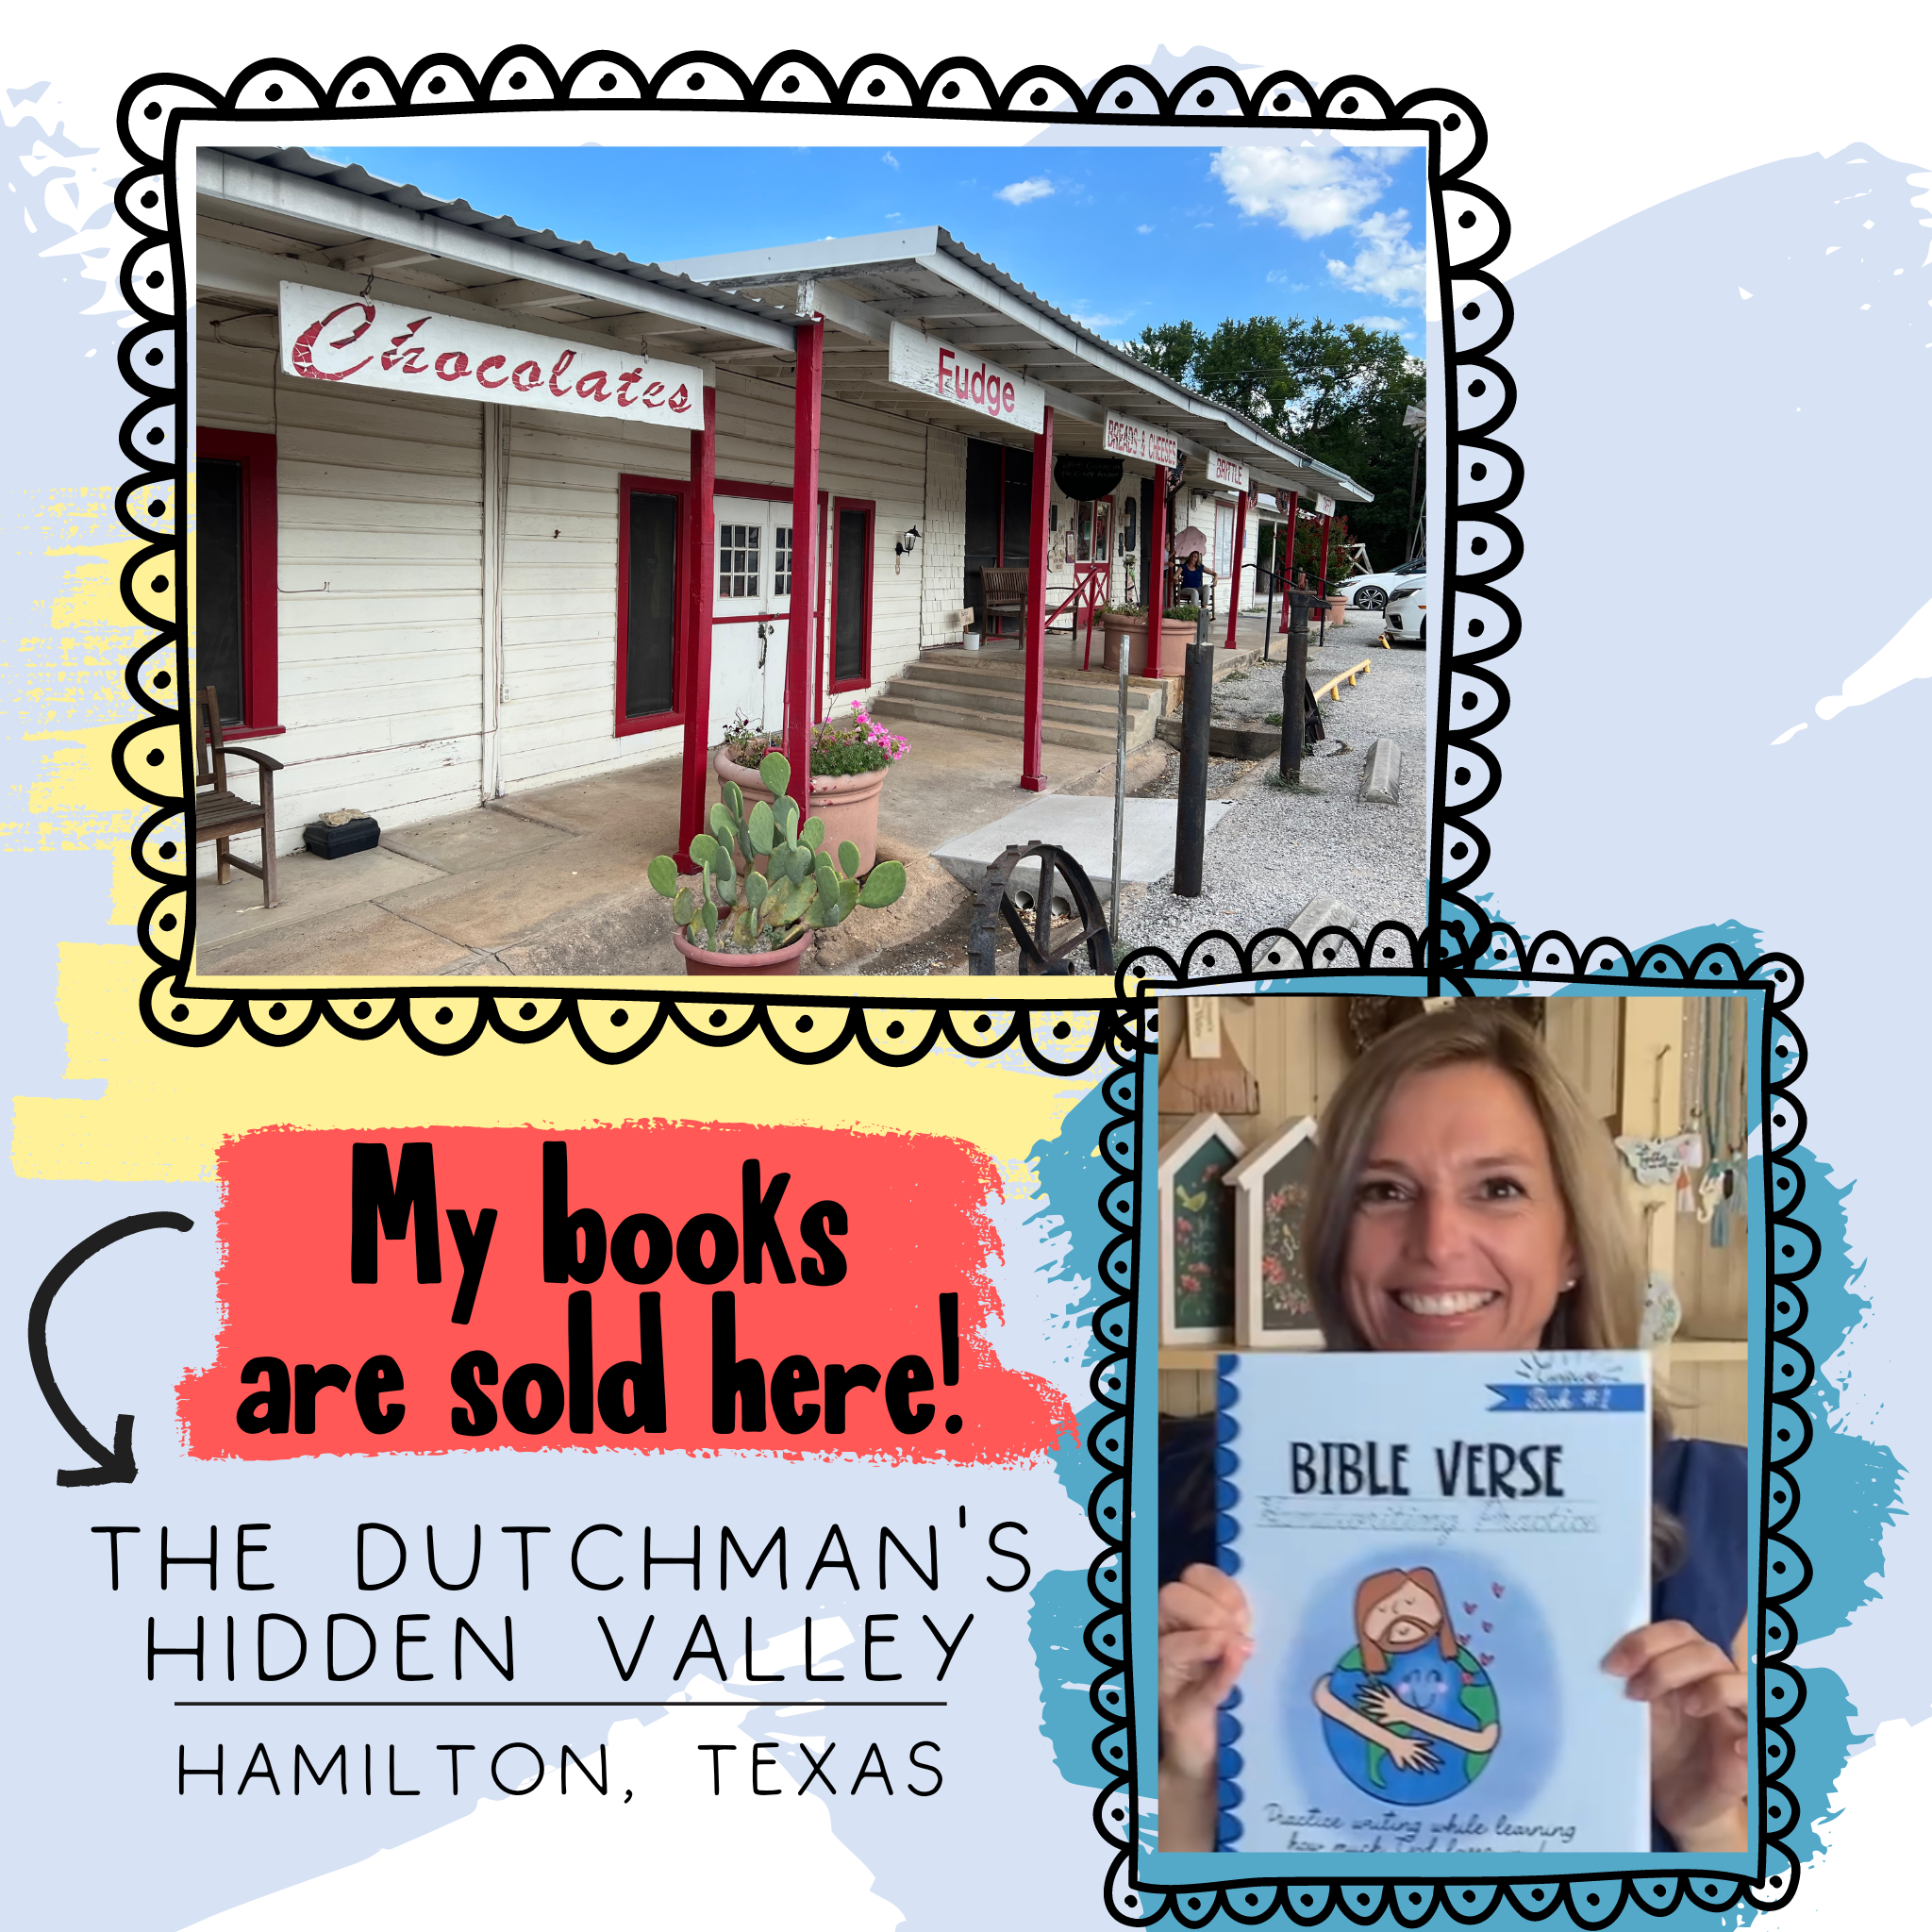 Amazon KDP's Self Published Author and Illustrator Lindsay Dain holding her Bible Verse Handwriting Book that she created through the Kindle Direct Publishing platform. She is at a store where it is sold called "The Dutchman's Hidden Valley."